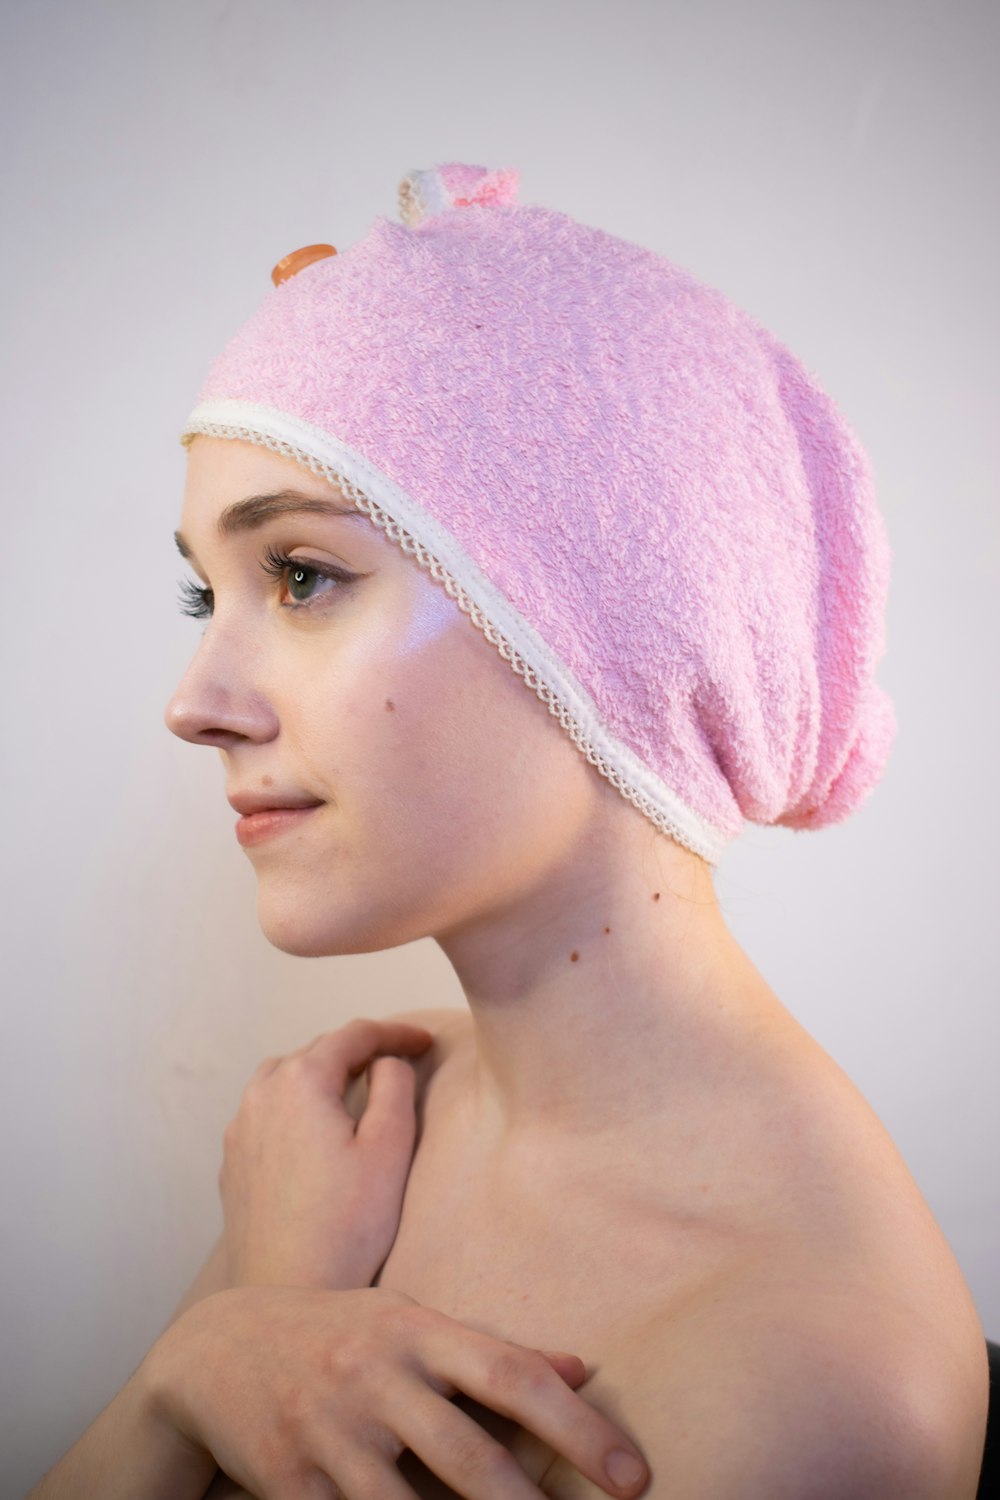 a woman with a pink towel on her head